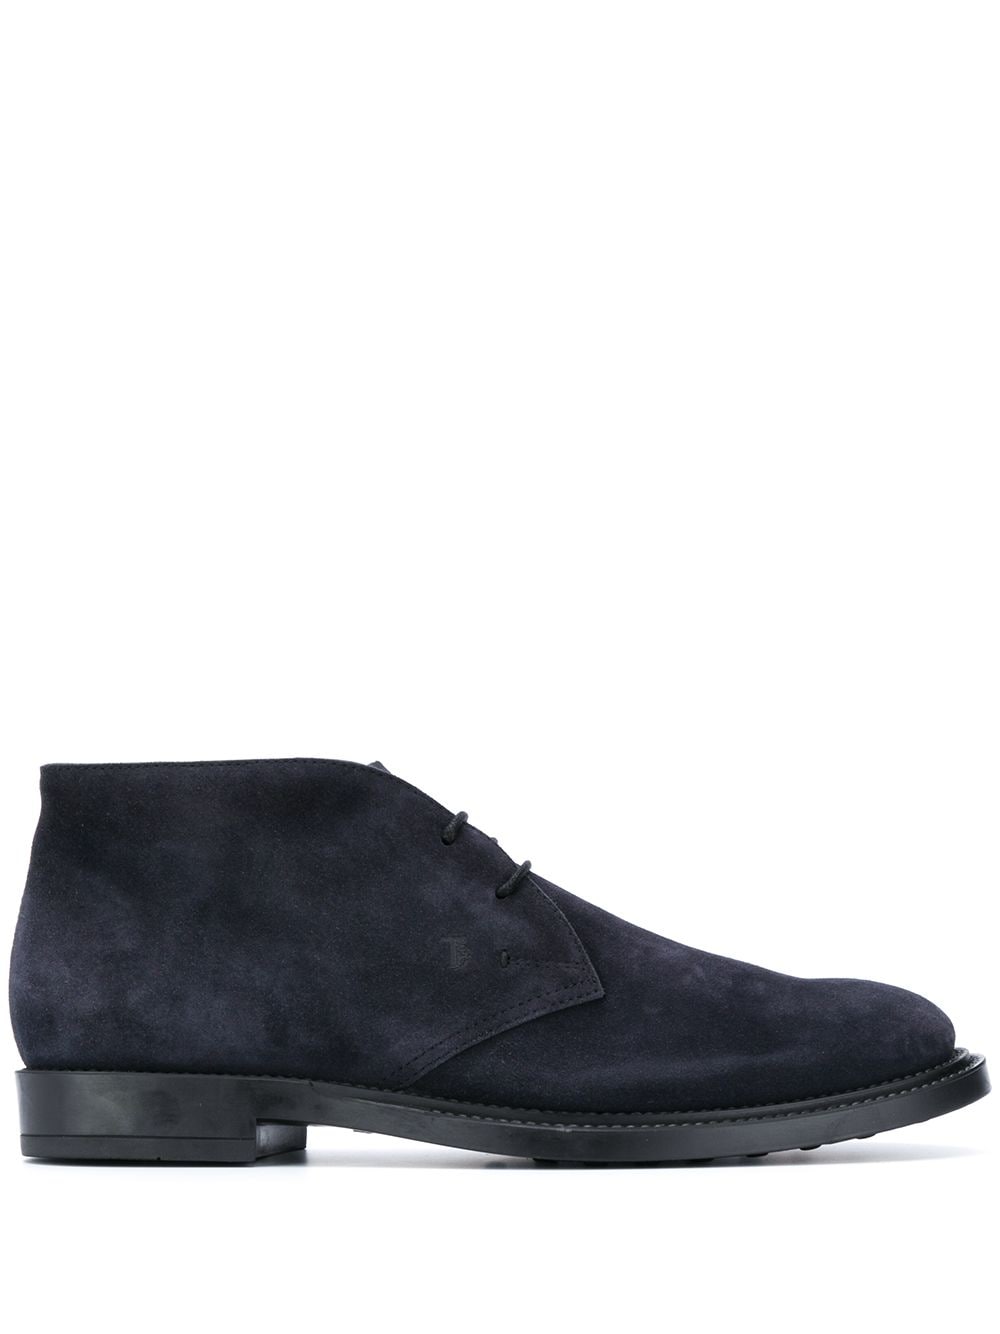 Tod's short ankle suede desert boots